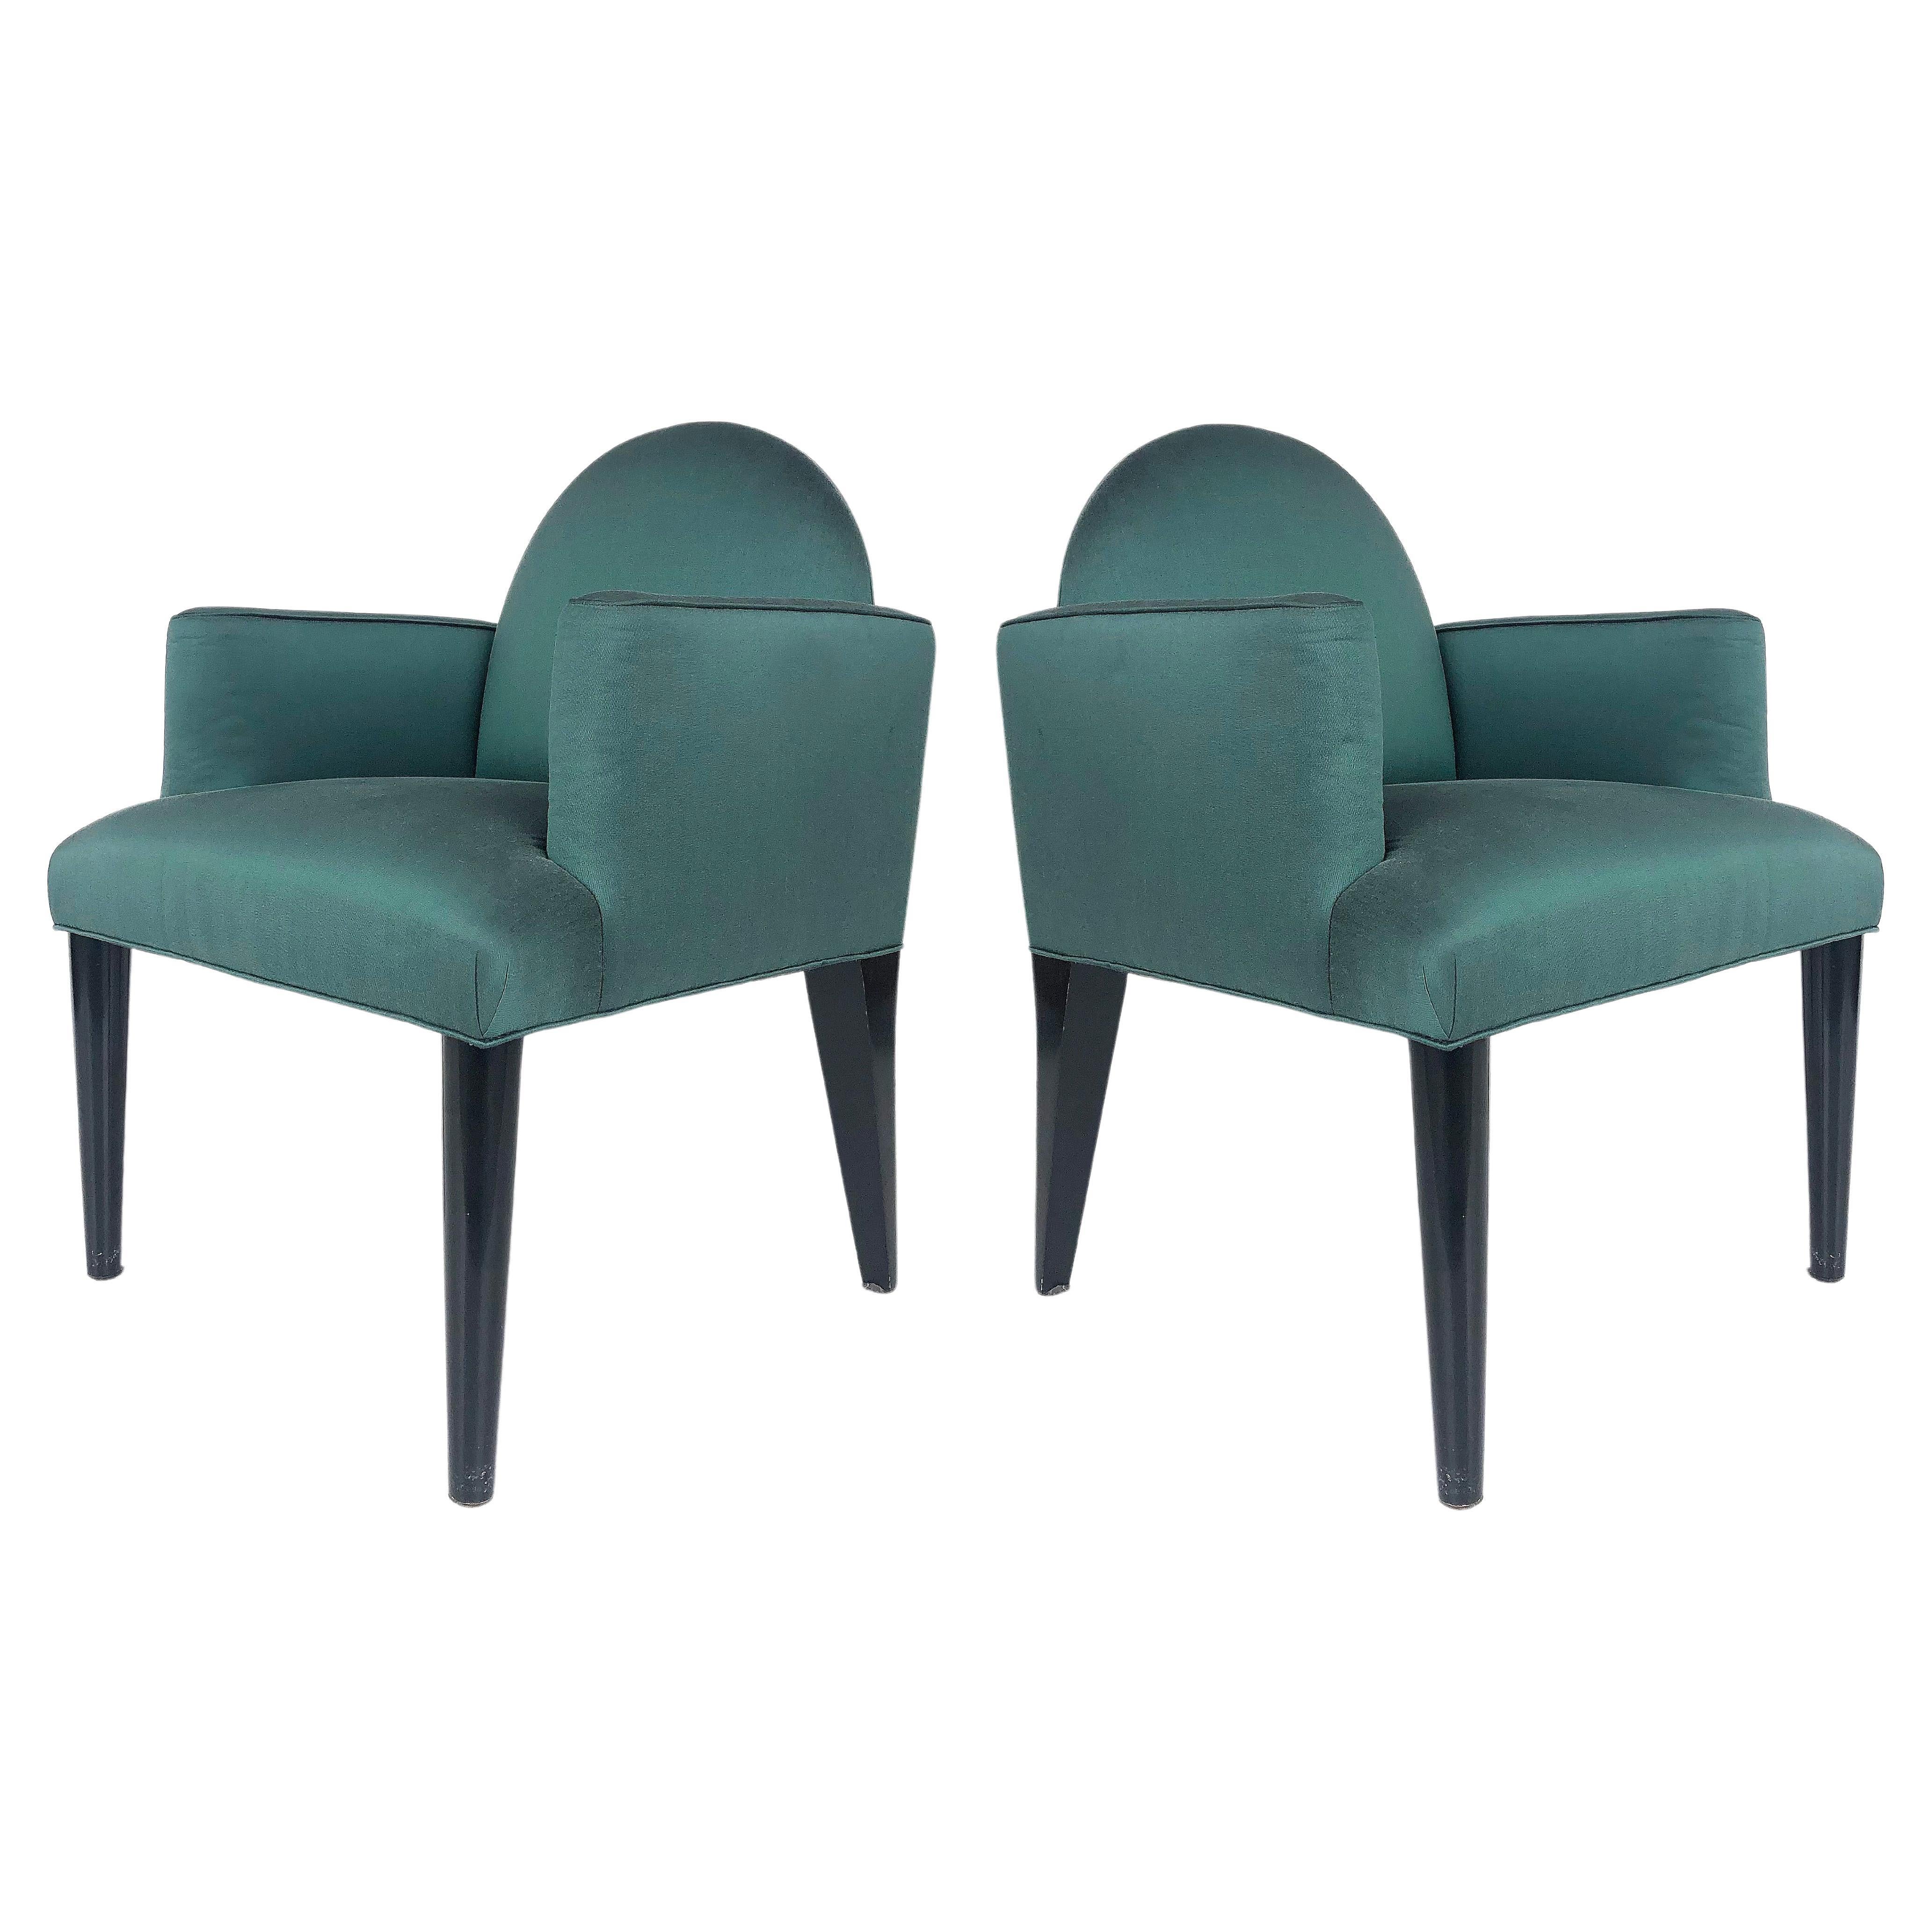 Upholstered Club Chairs with Ebonized Wood, Donghia Attributed